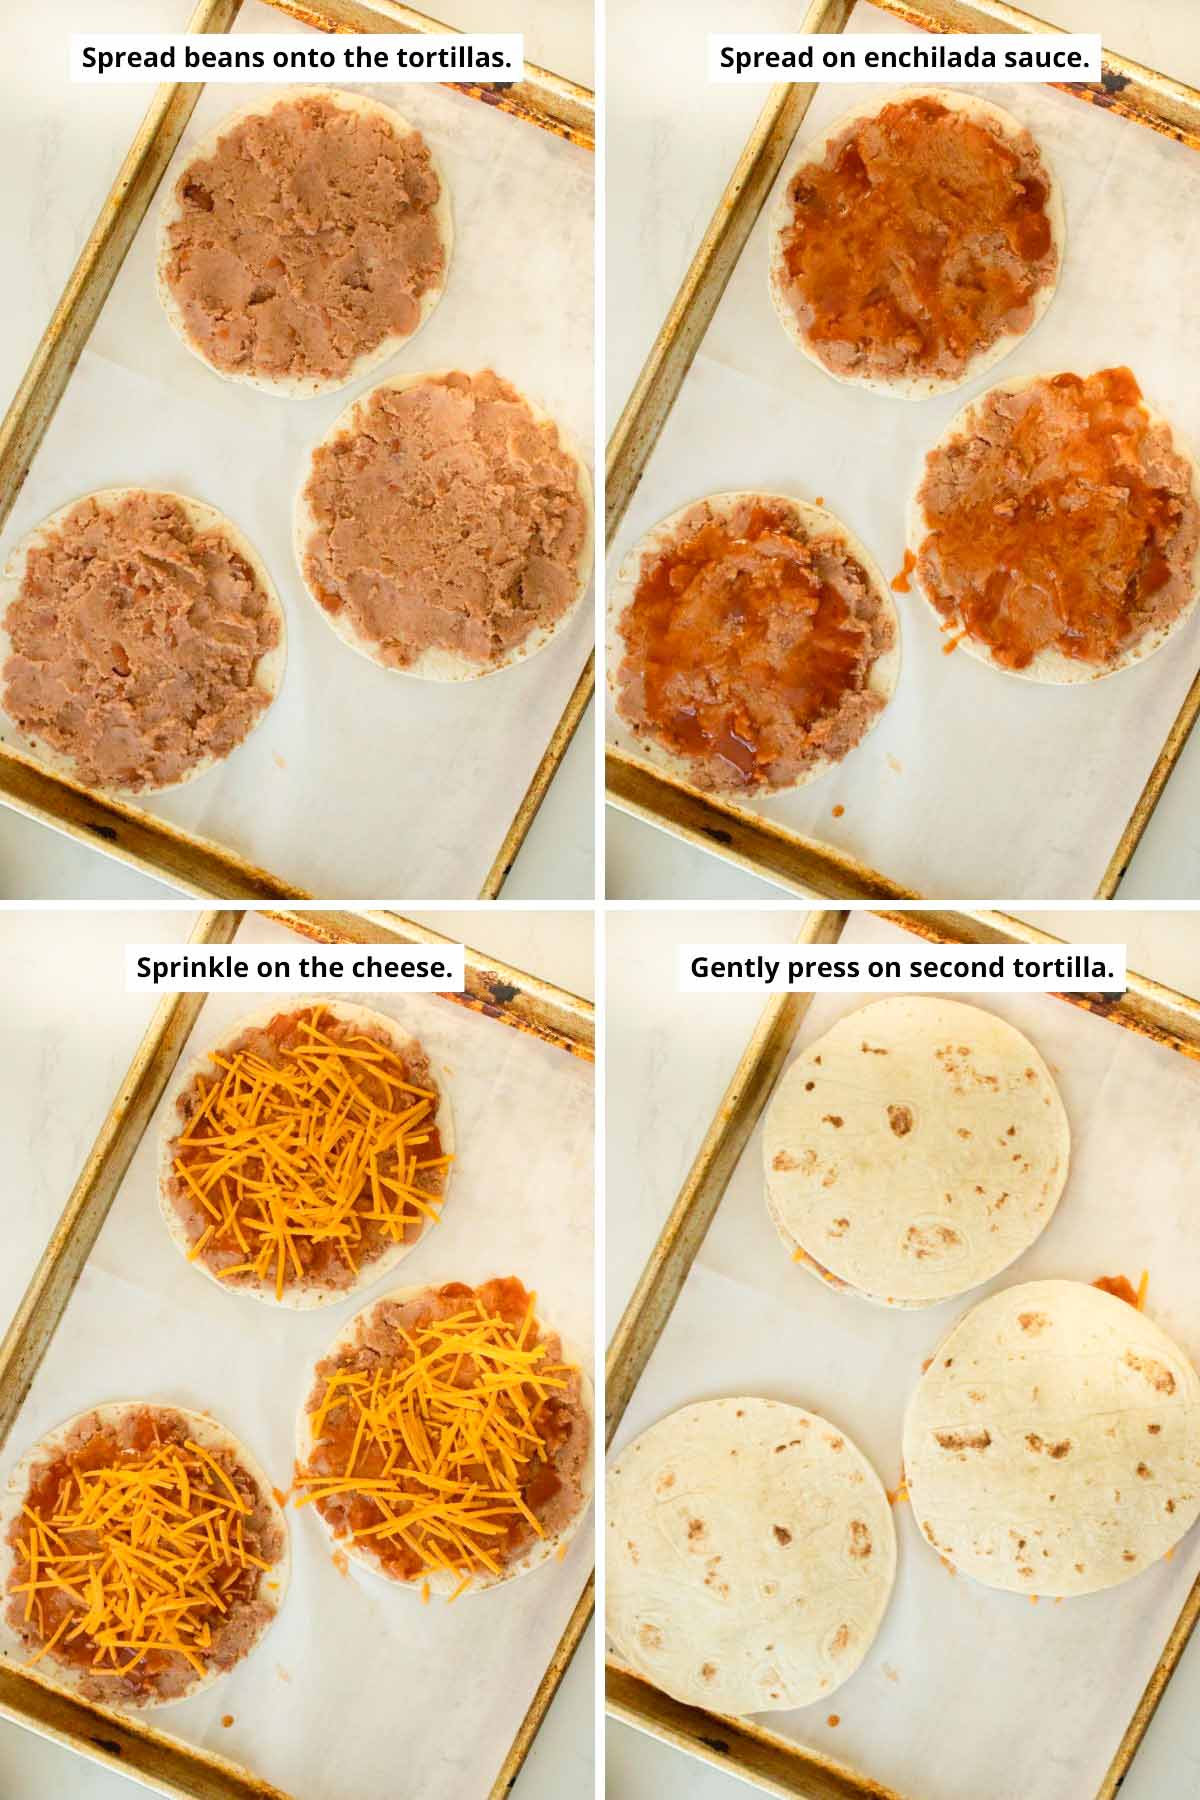 image collage showing adding the beans, adding sauce, then cheese, then the second tortilla